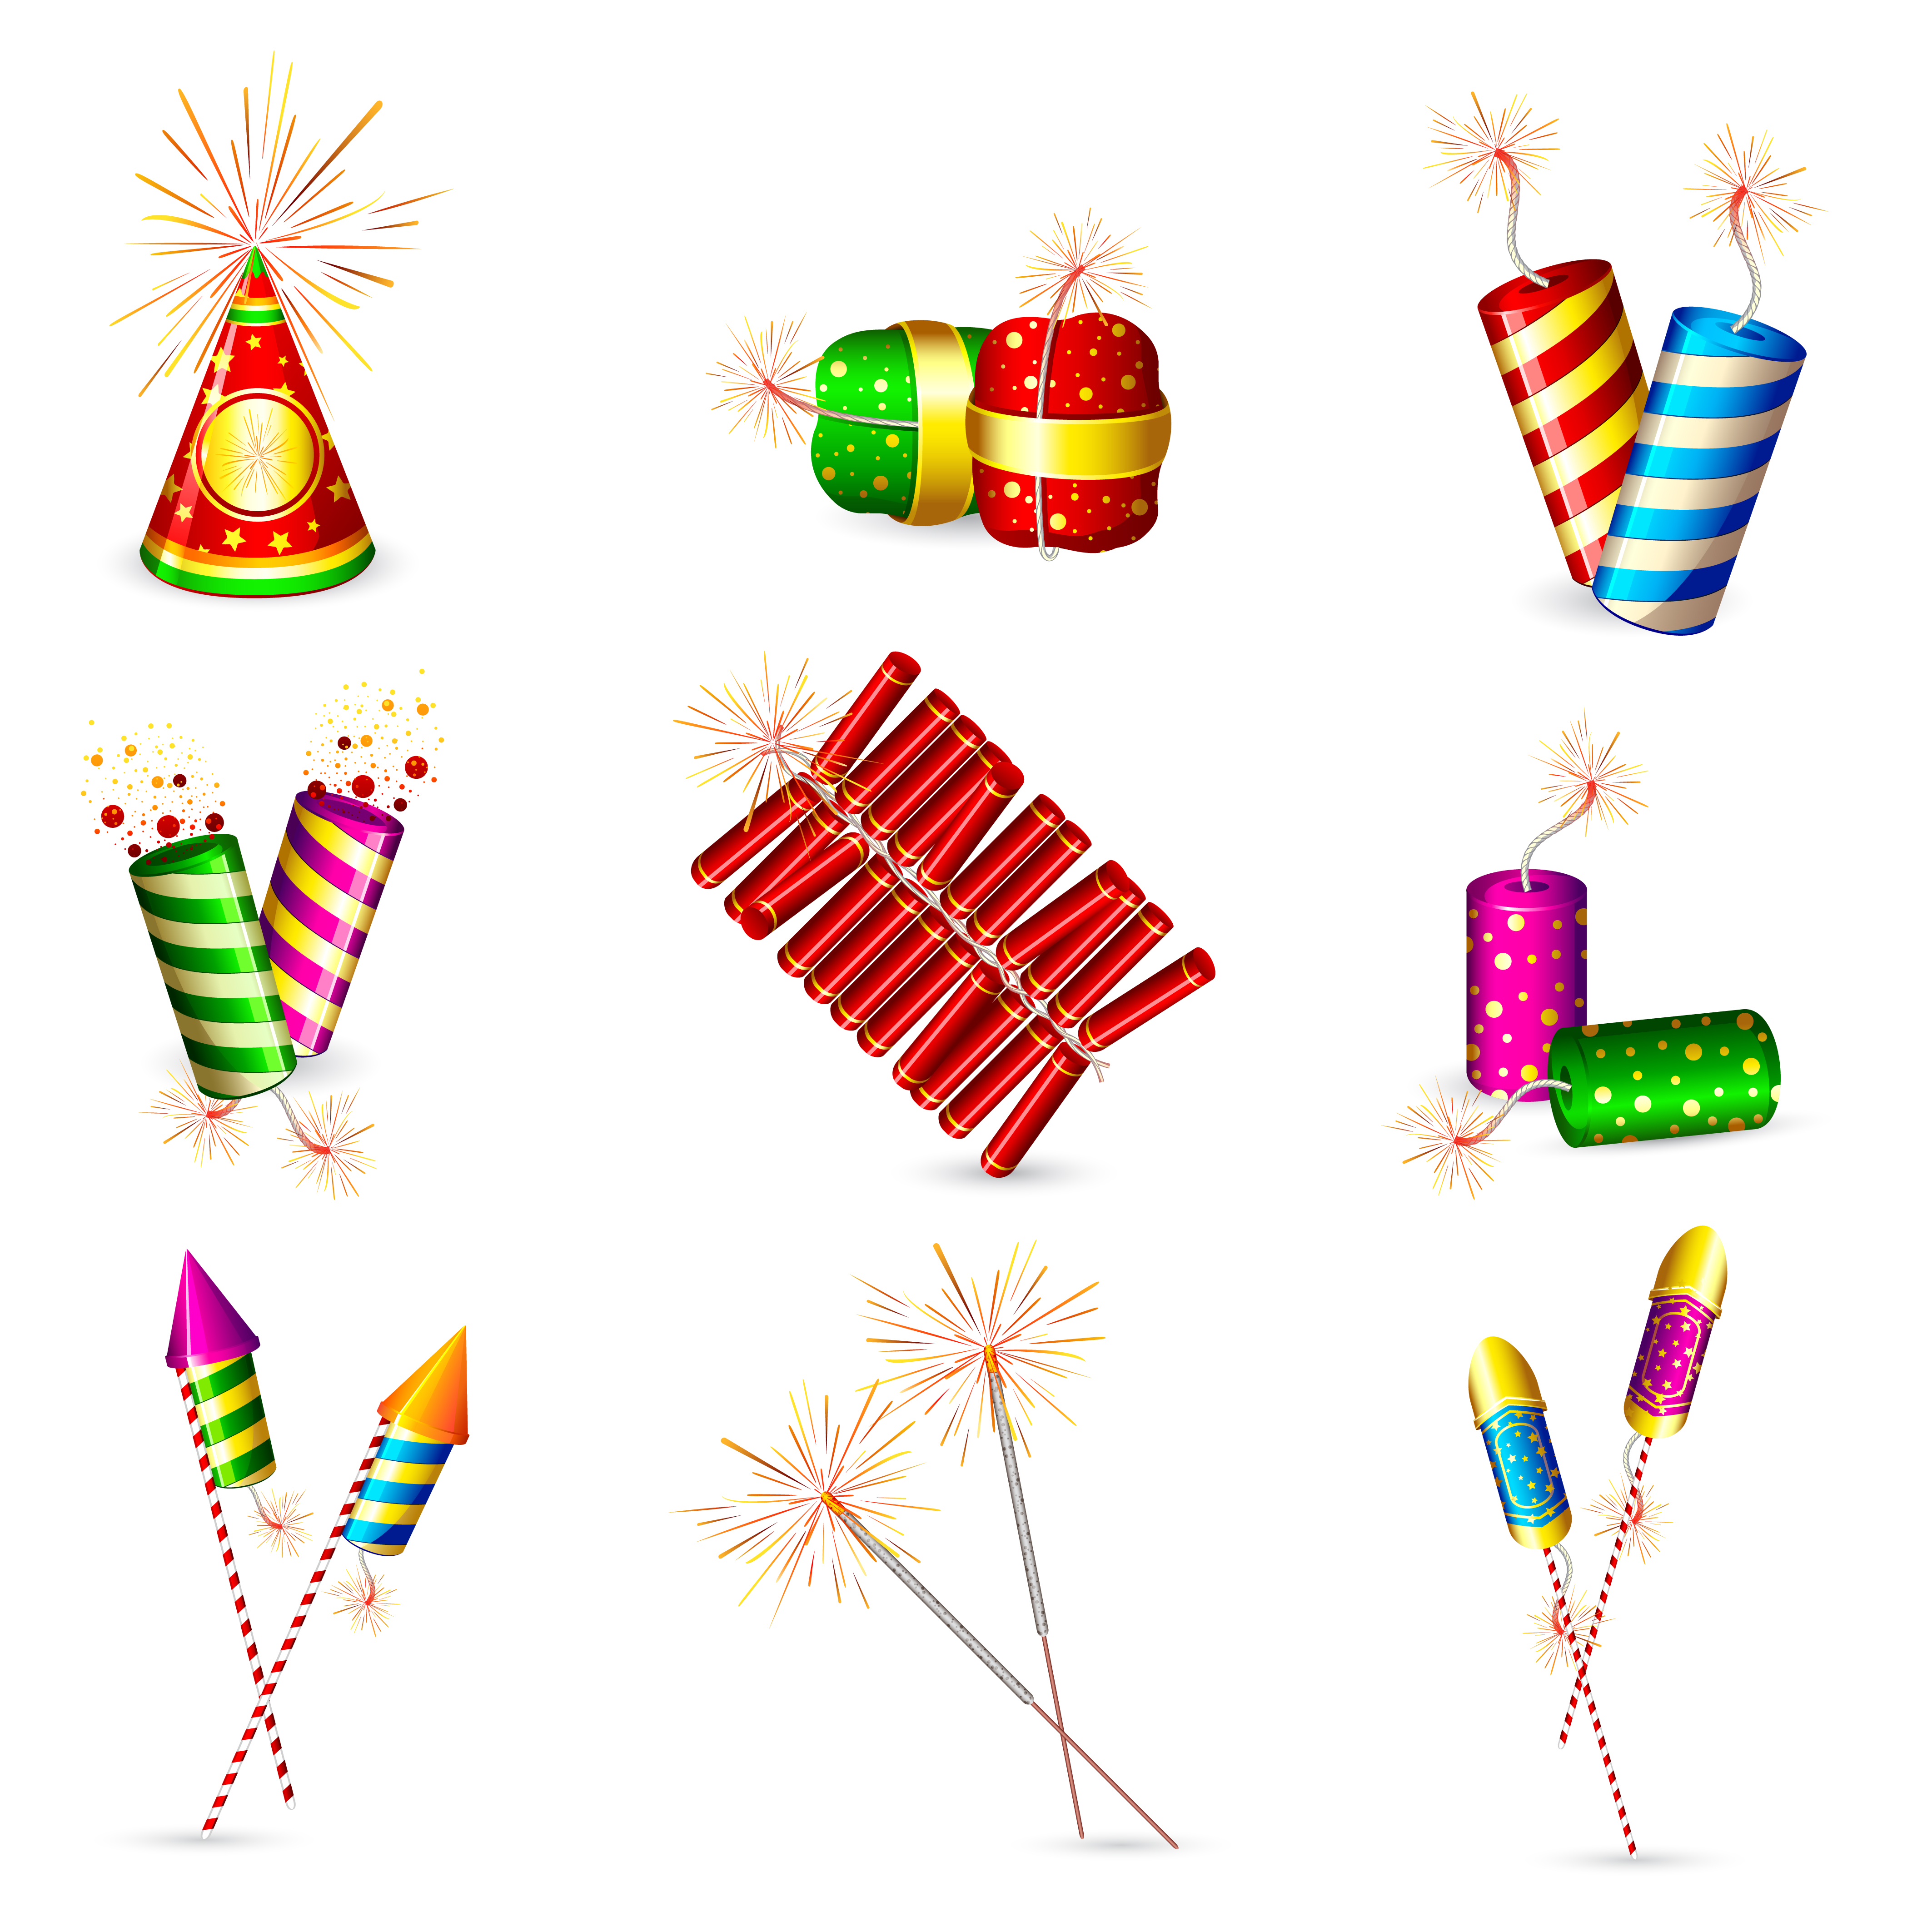 Image Of Fire Crackers - ClipArt Best